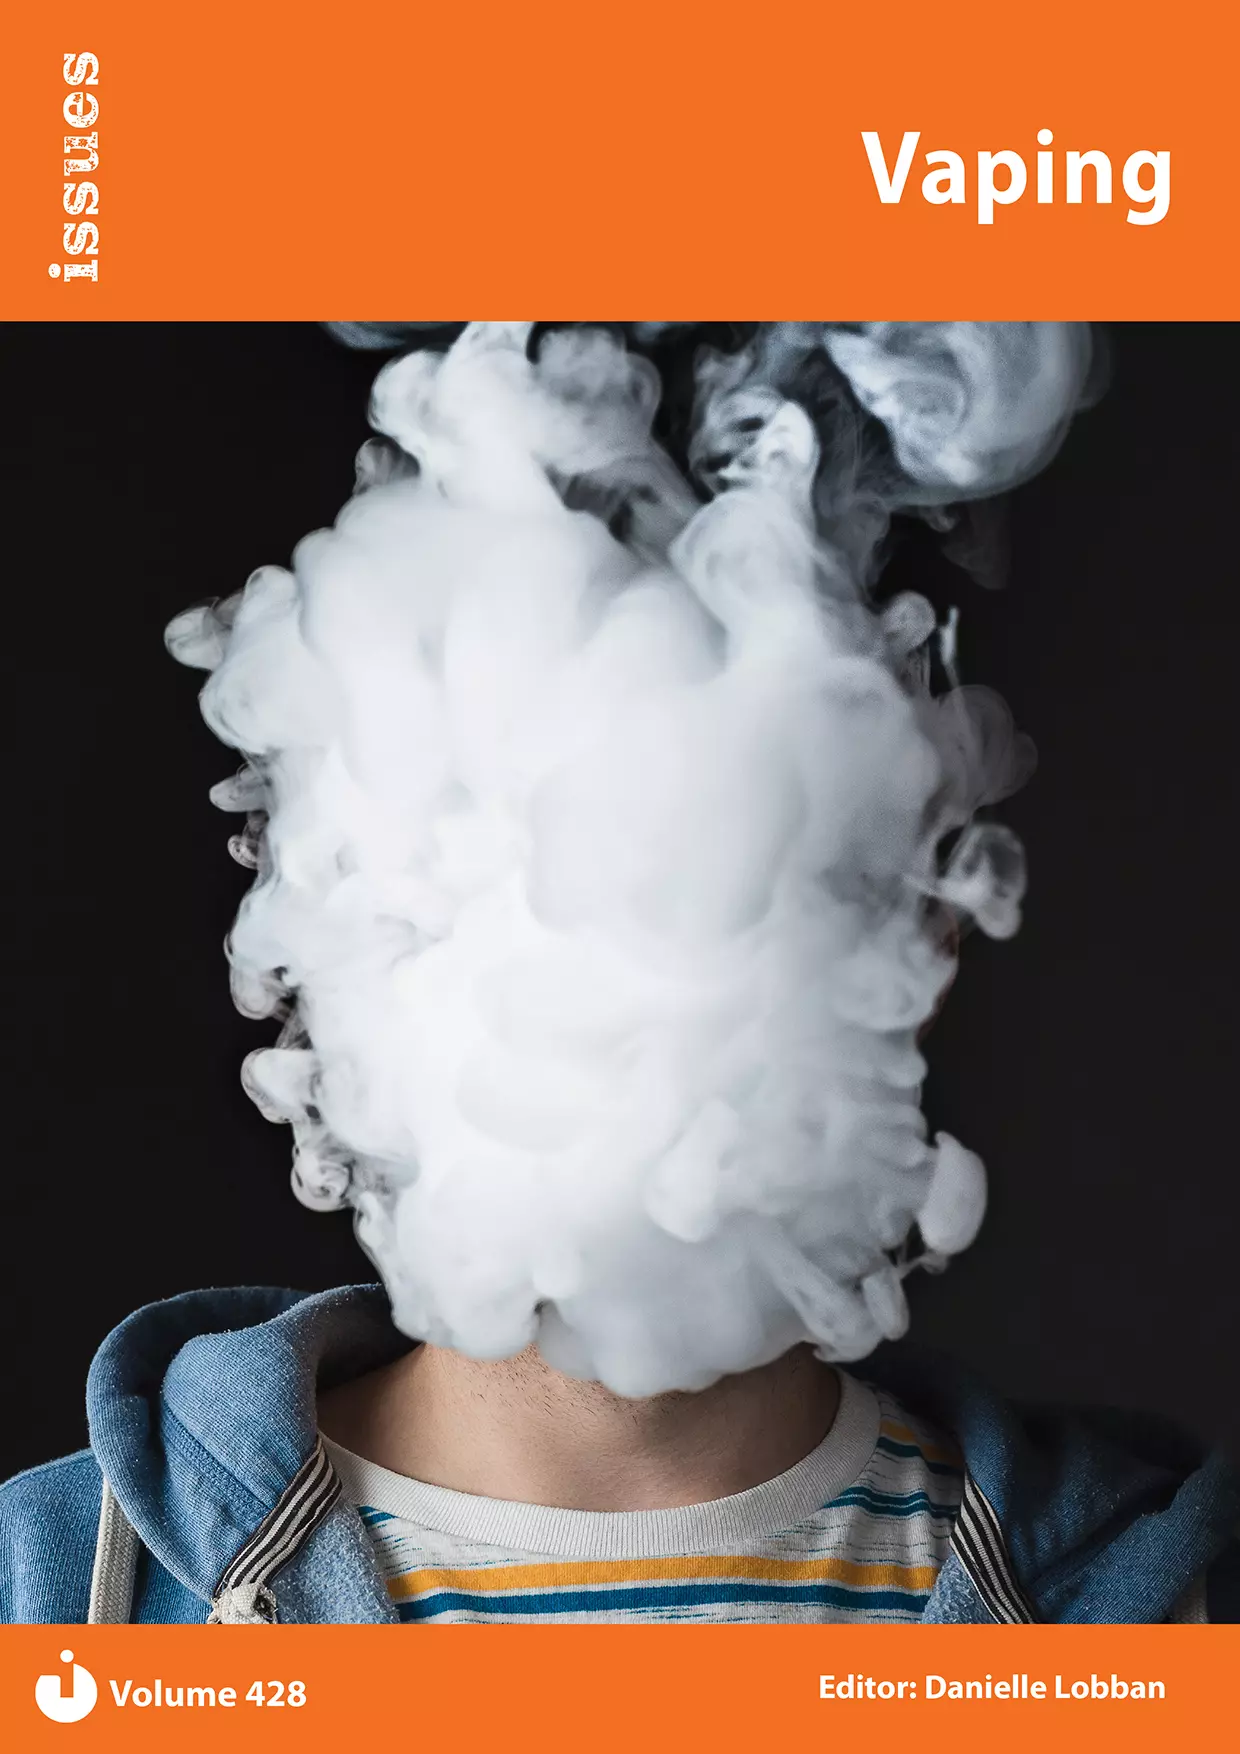 9% of school children aged 11- to 15-years-old vape on a regular or occasional basis. This book look...